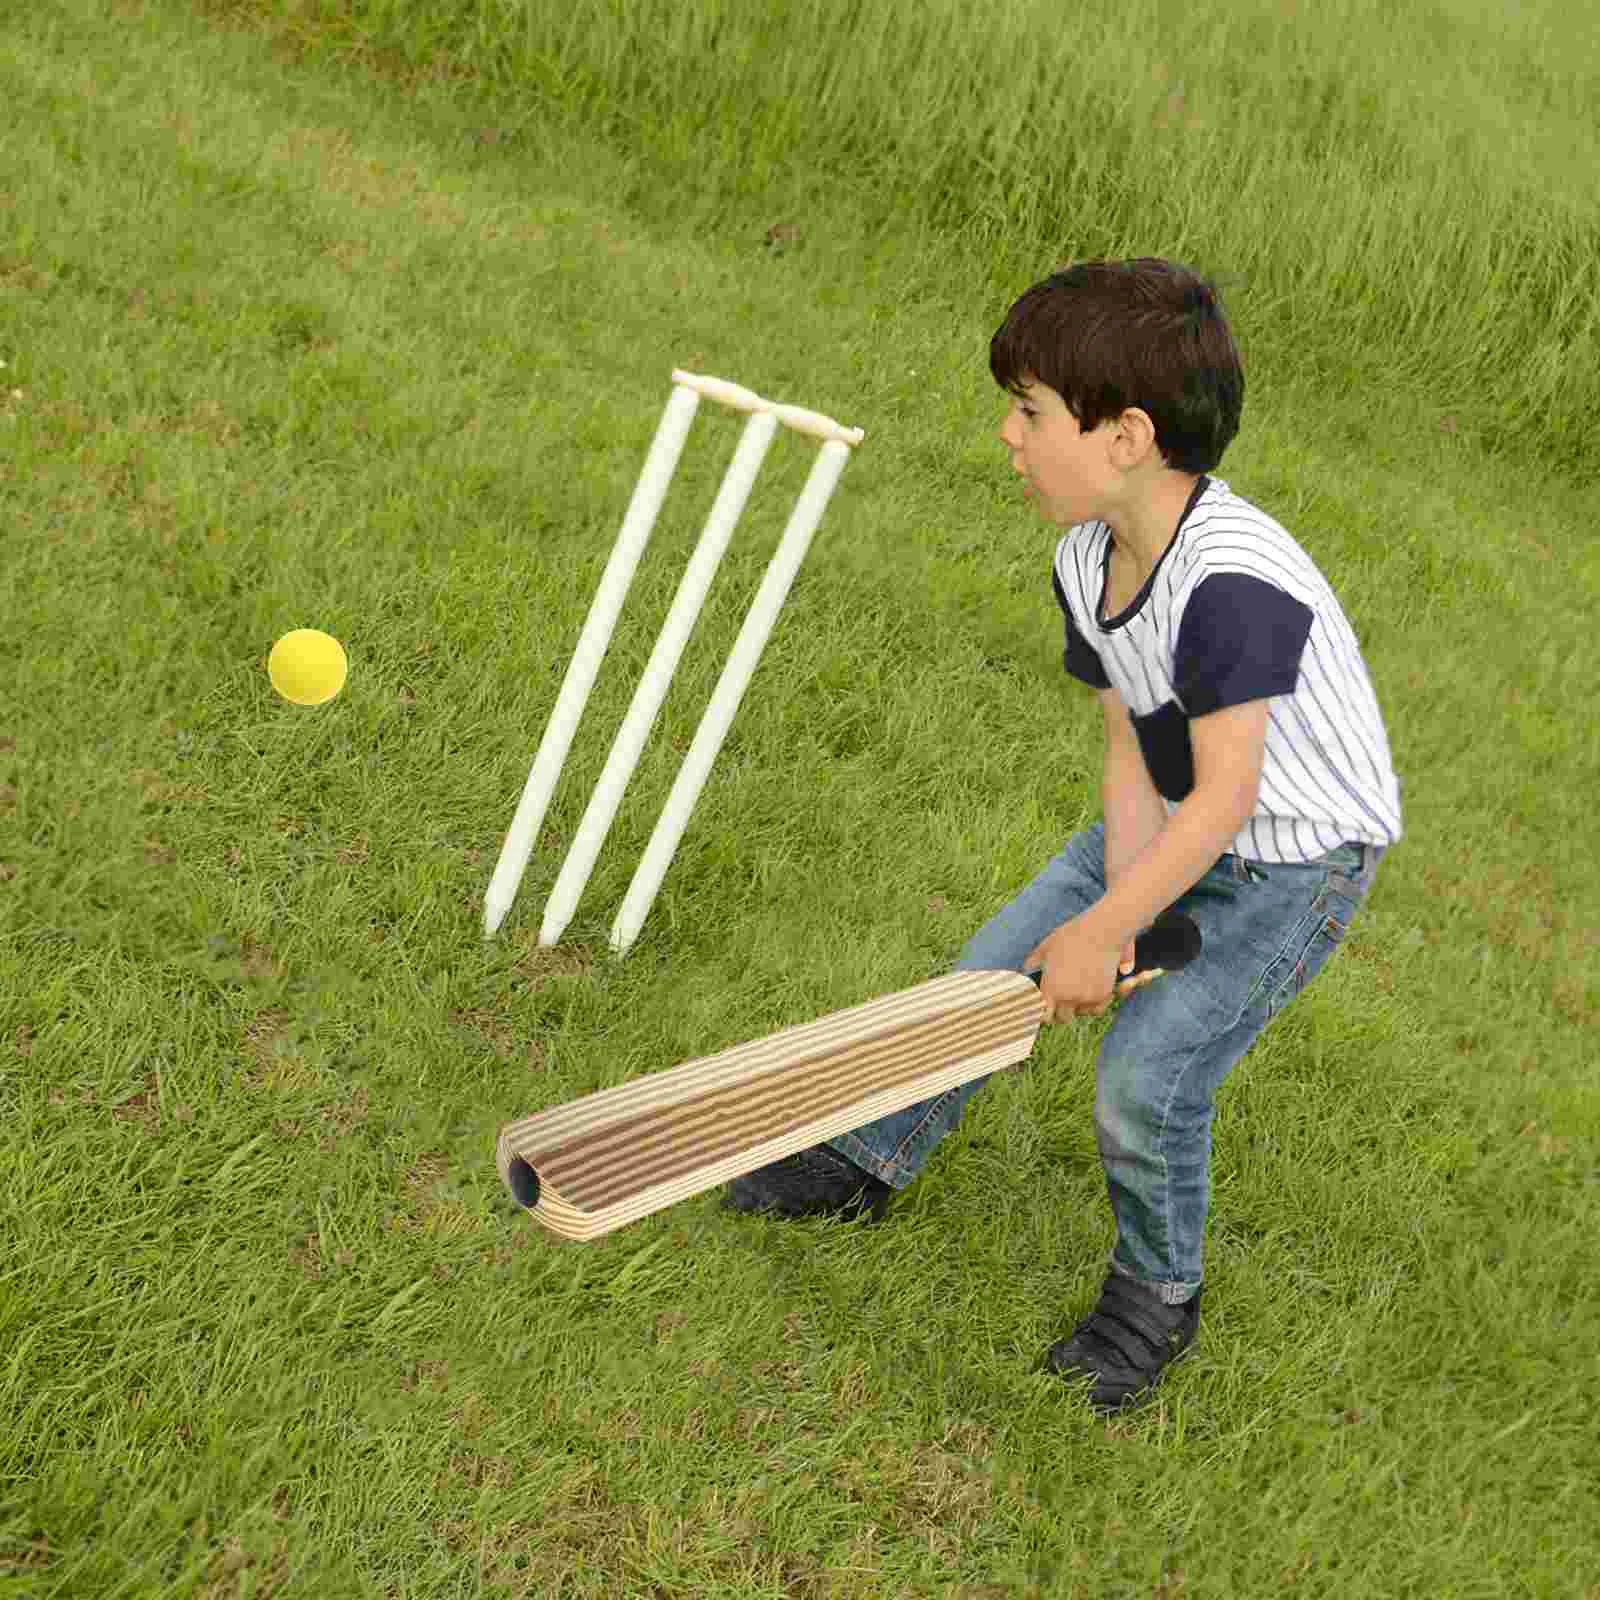 

of Kids Cricket Set Kids Beach Toy Beach Outdoor Sports Game Set Interactive Cricket Game Educational Toy for Kids